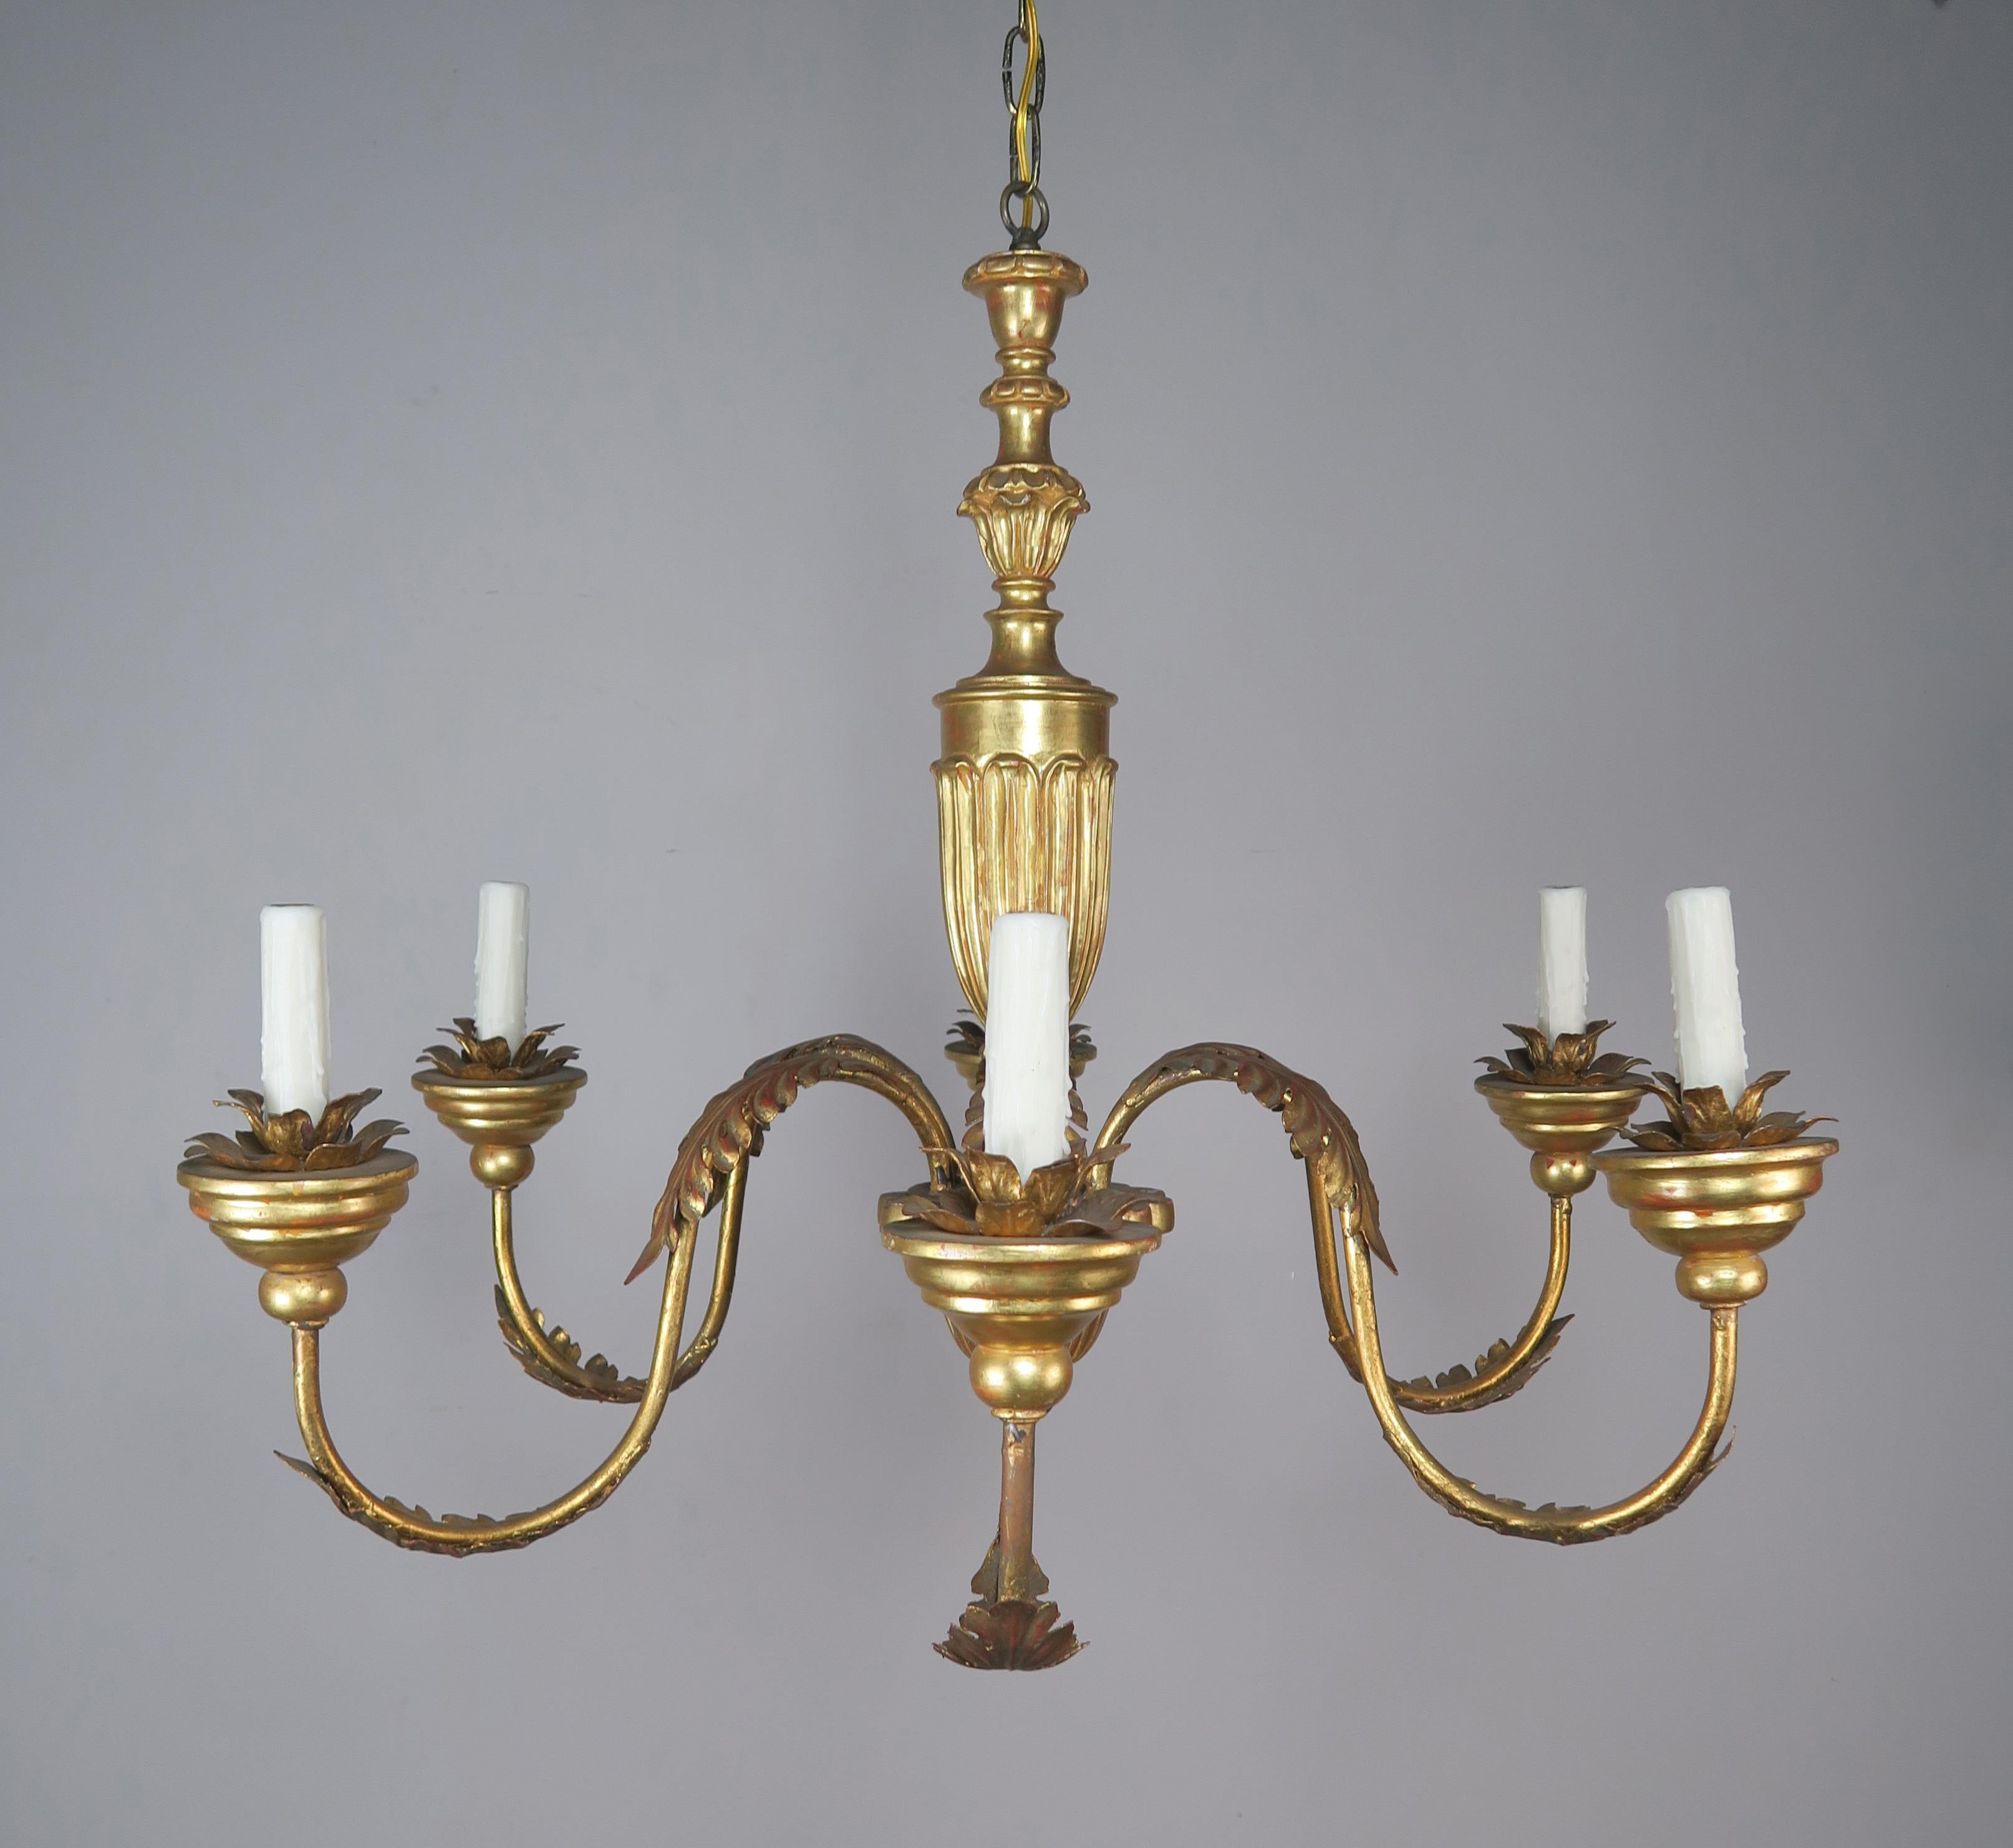 Six-light Italian 22-karat giltwood and metal chandelier with acanthus leaf metal detailing and fluted center column.